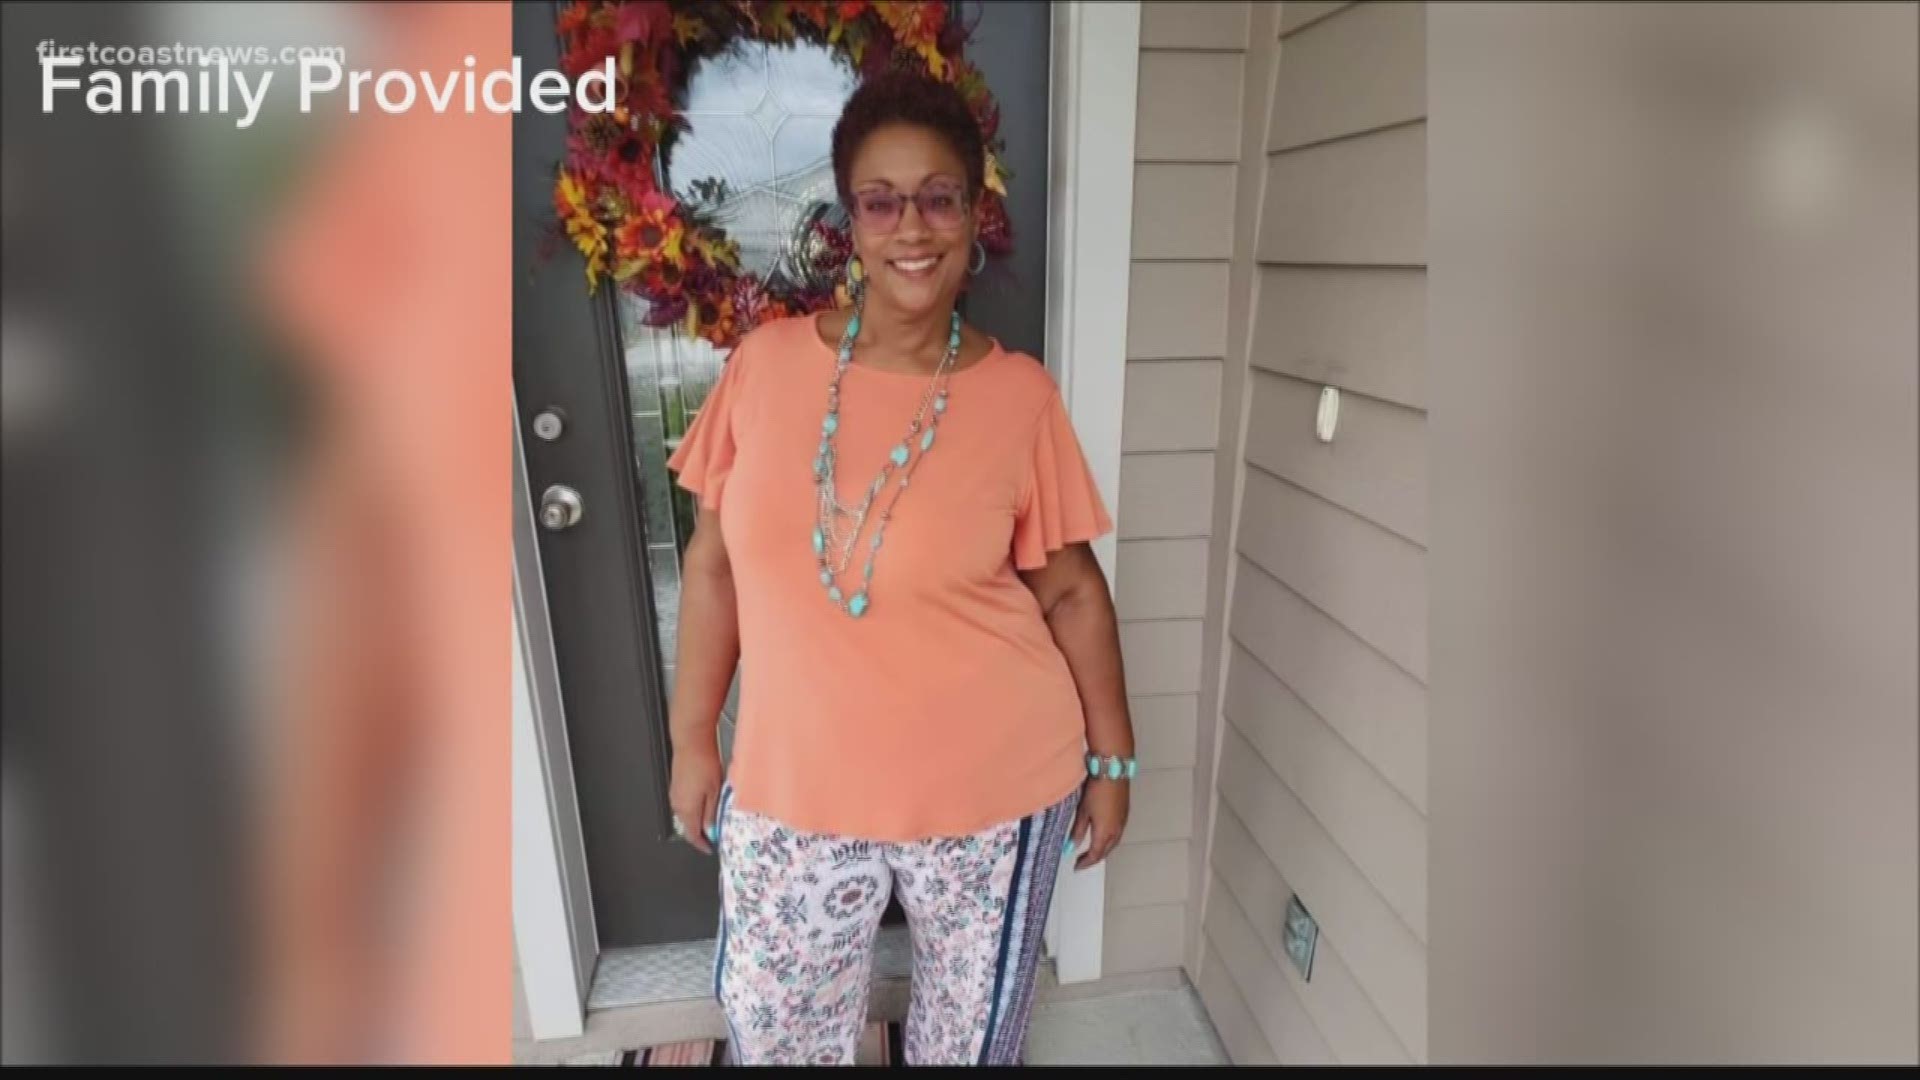 Family members identified 49-year-old Vivian James as the woman found dead in a Westside home. She worked as a science teacher at Atlantic Coast High School.